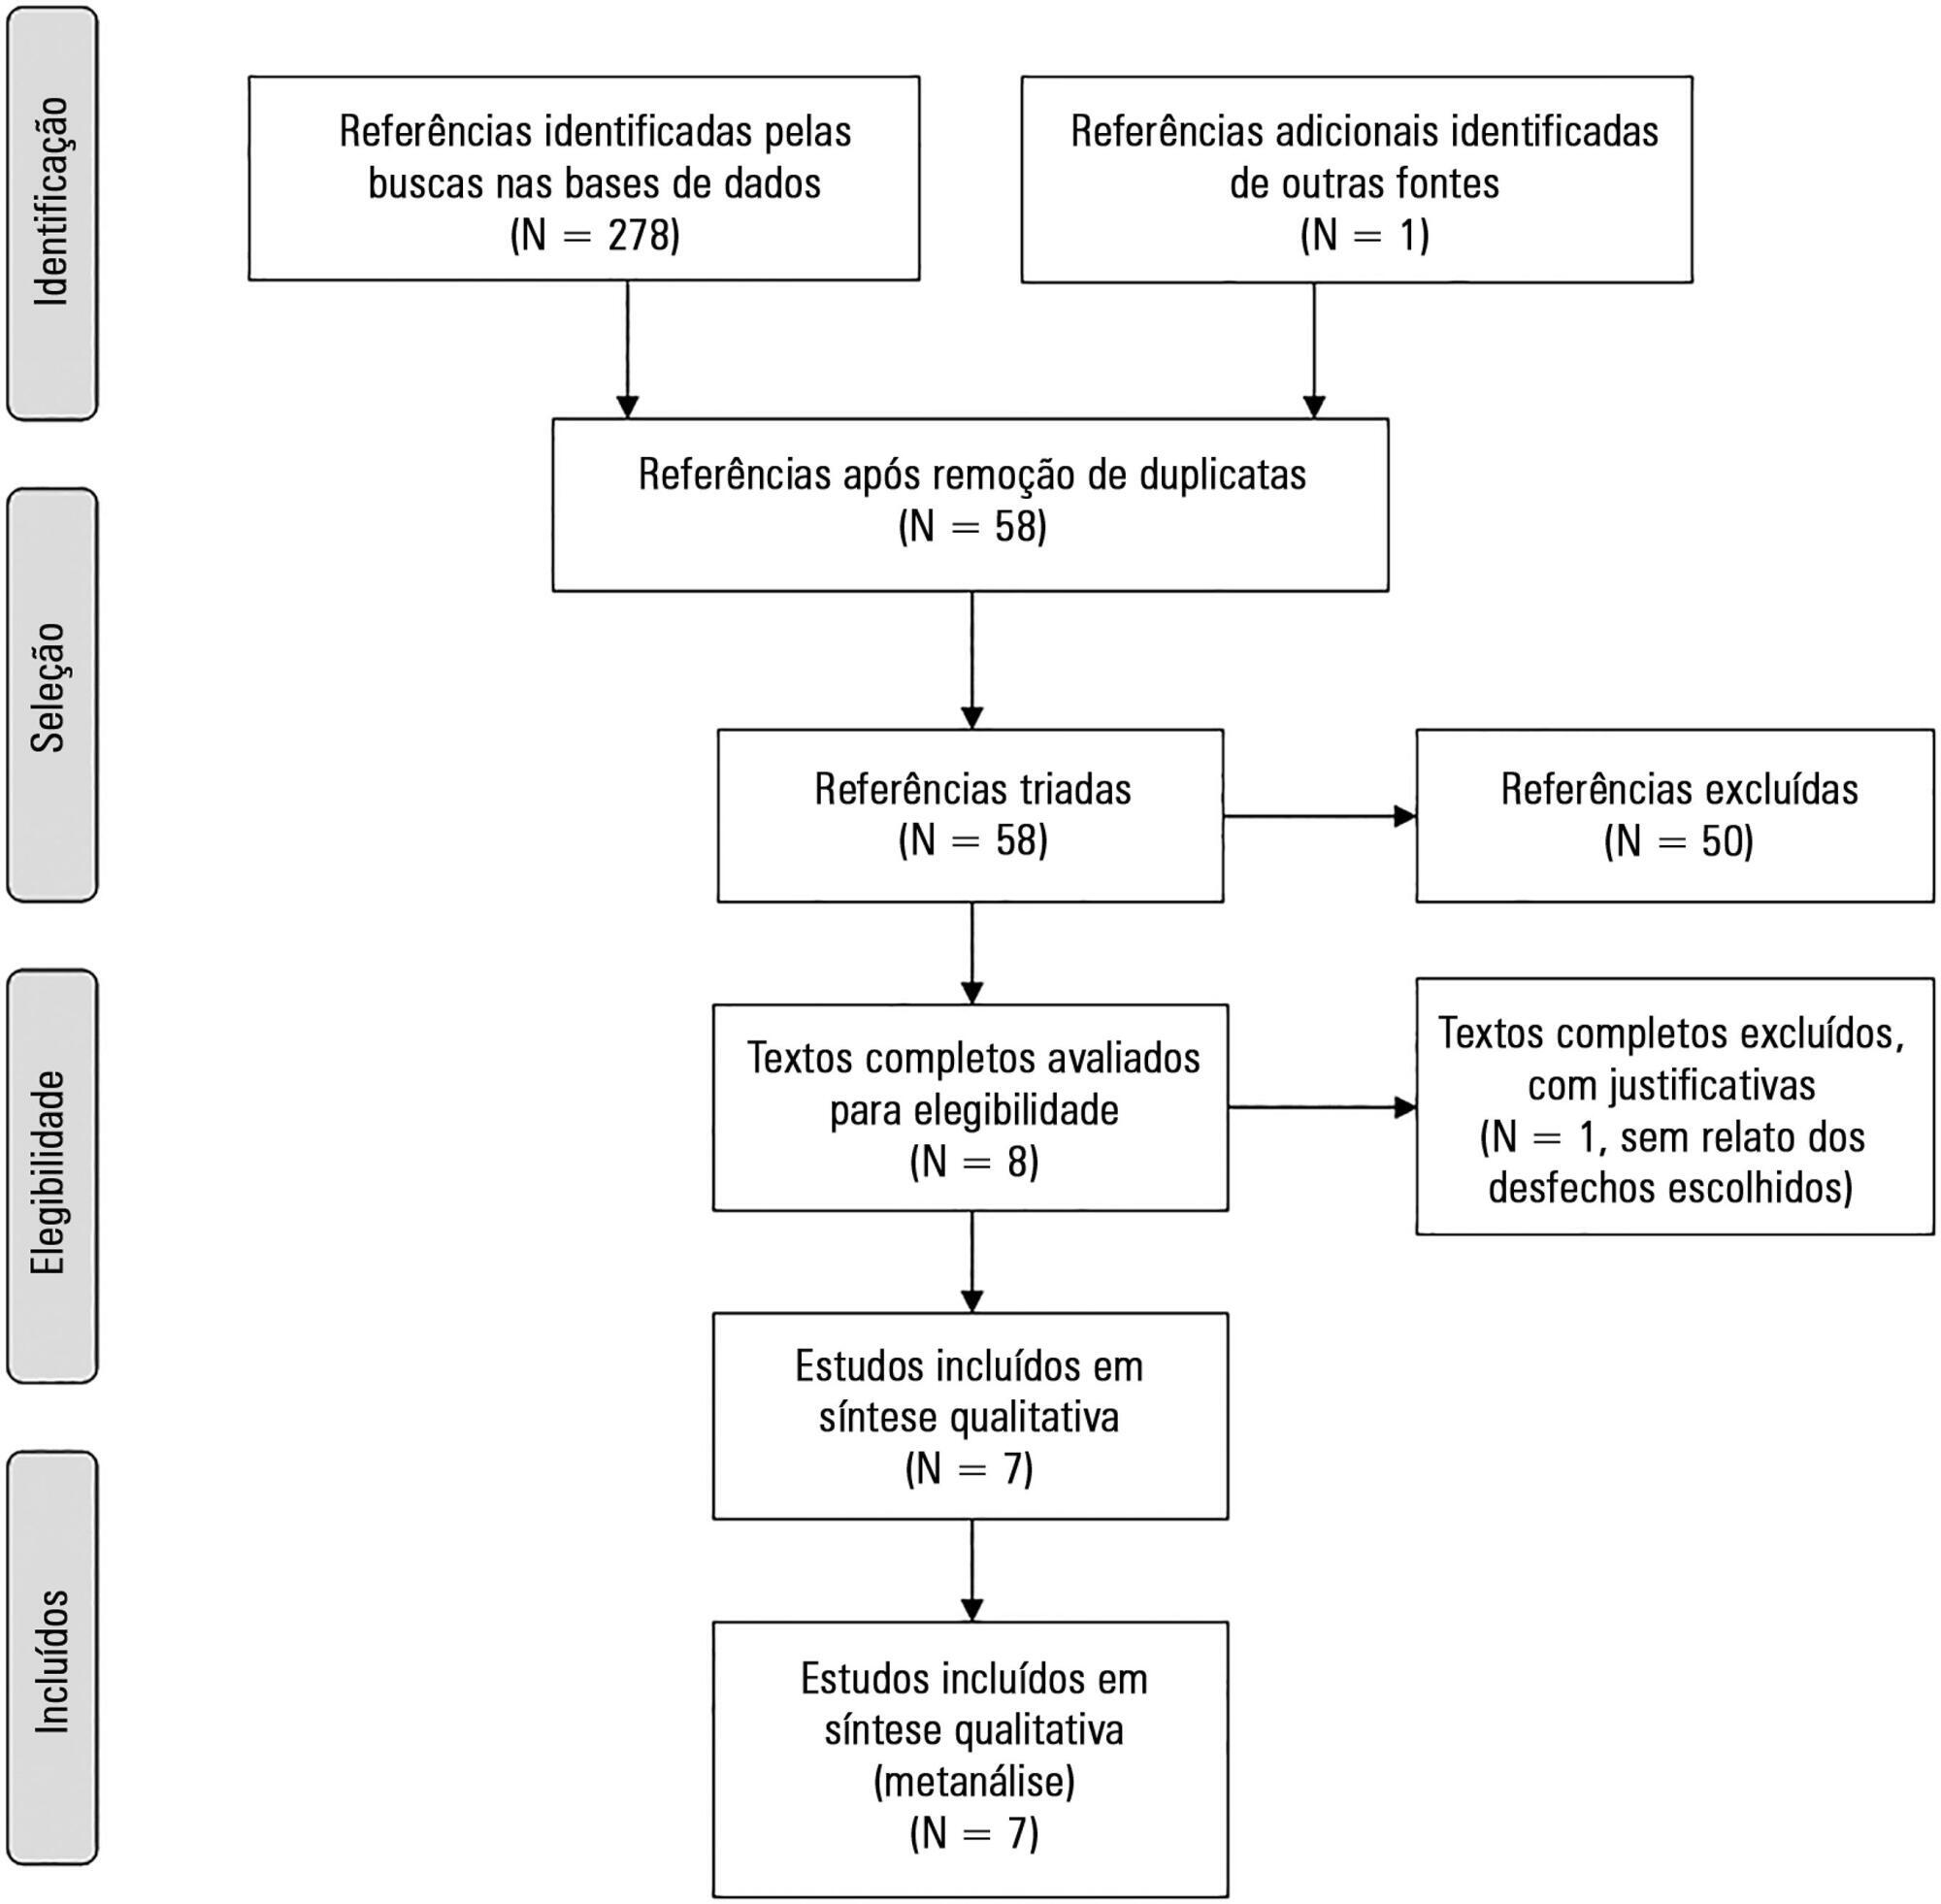 Sedation protocols versus daily sedation interruption: a systematic review and meta-analysis